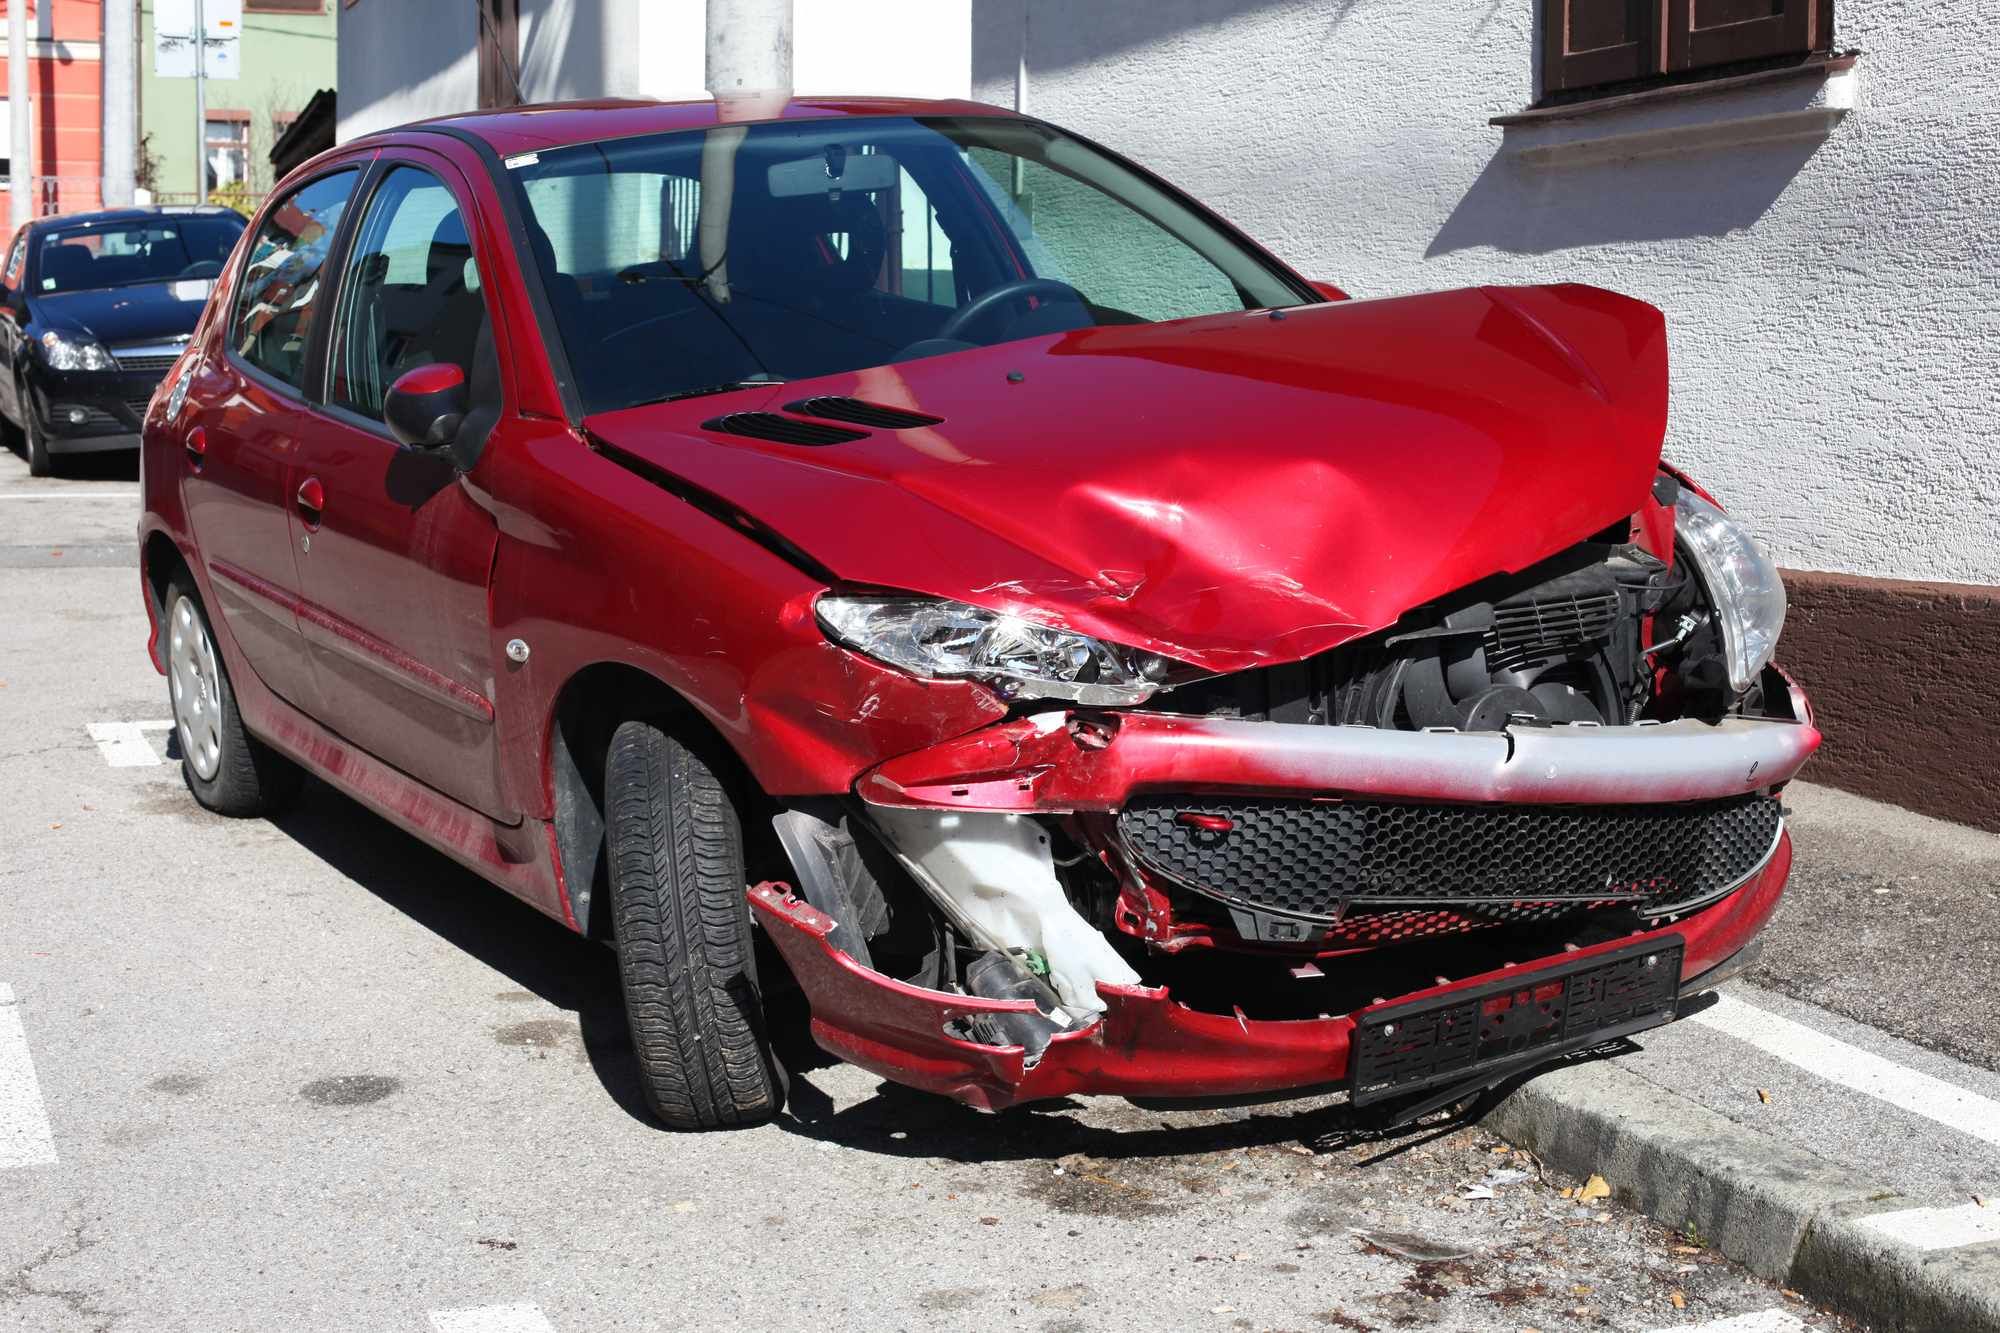 Insurance companies may deem a total loss of vehicle after a car wreck - pemco insurance